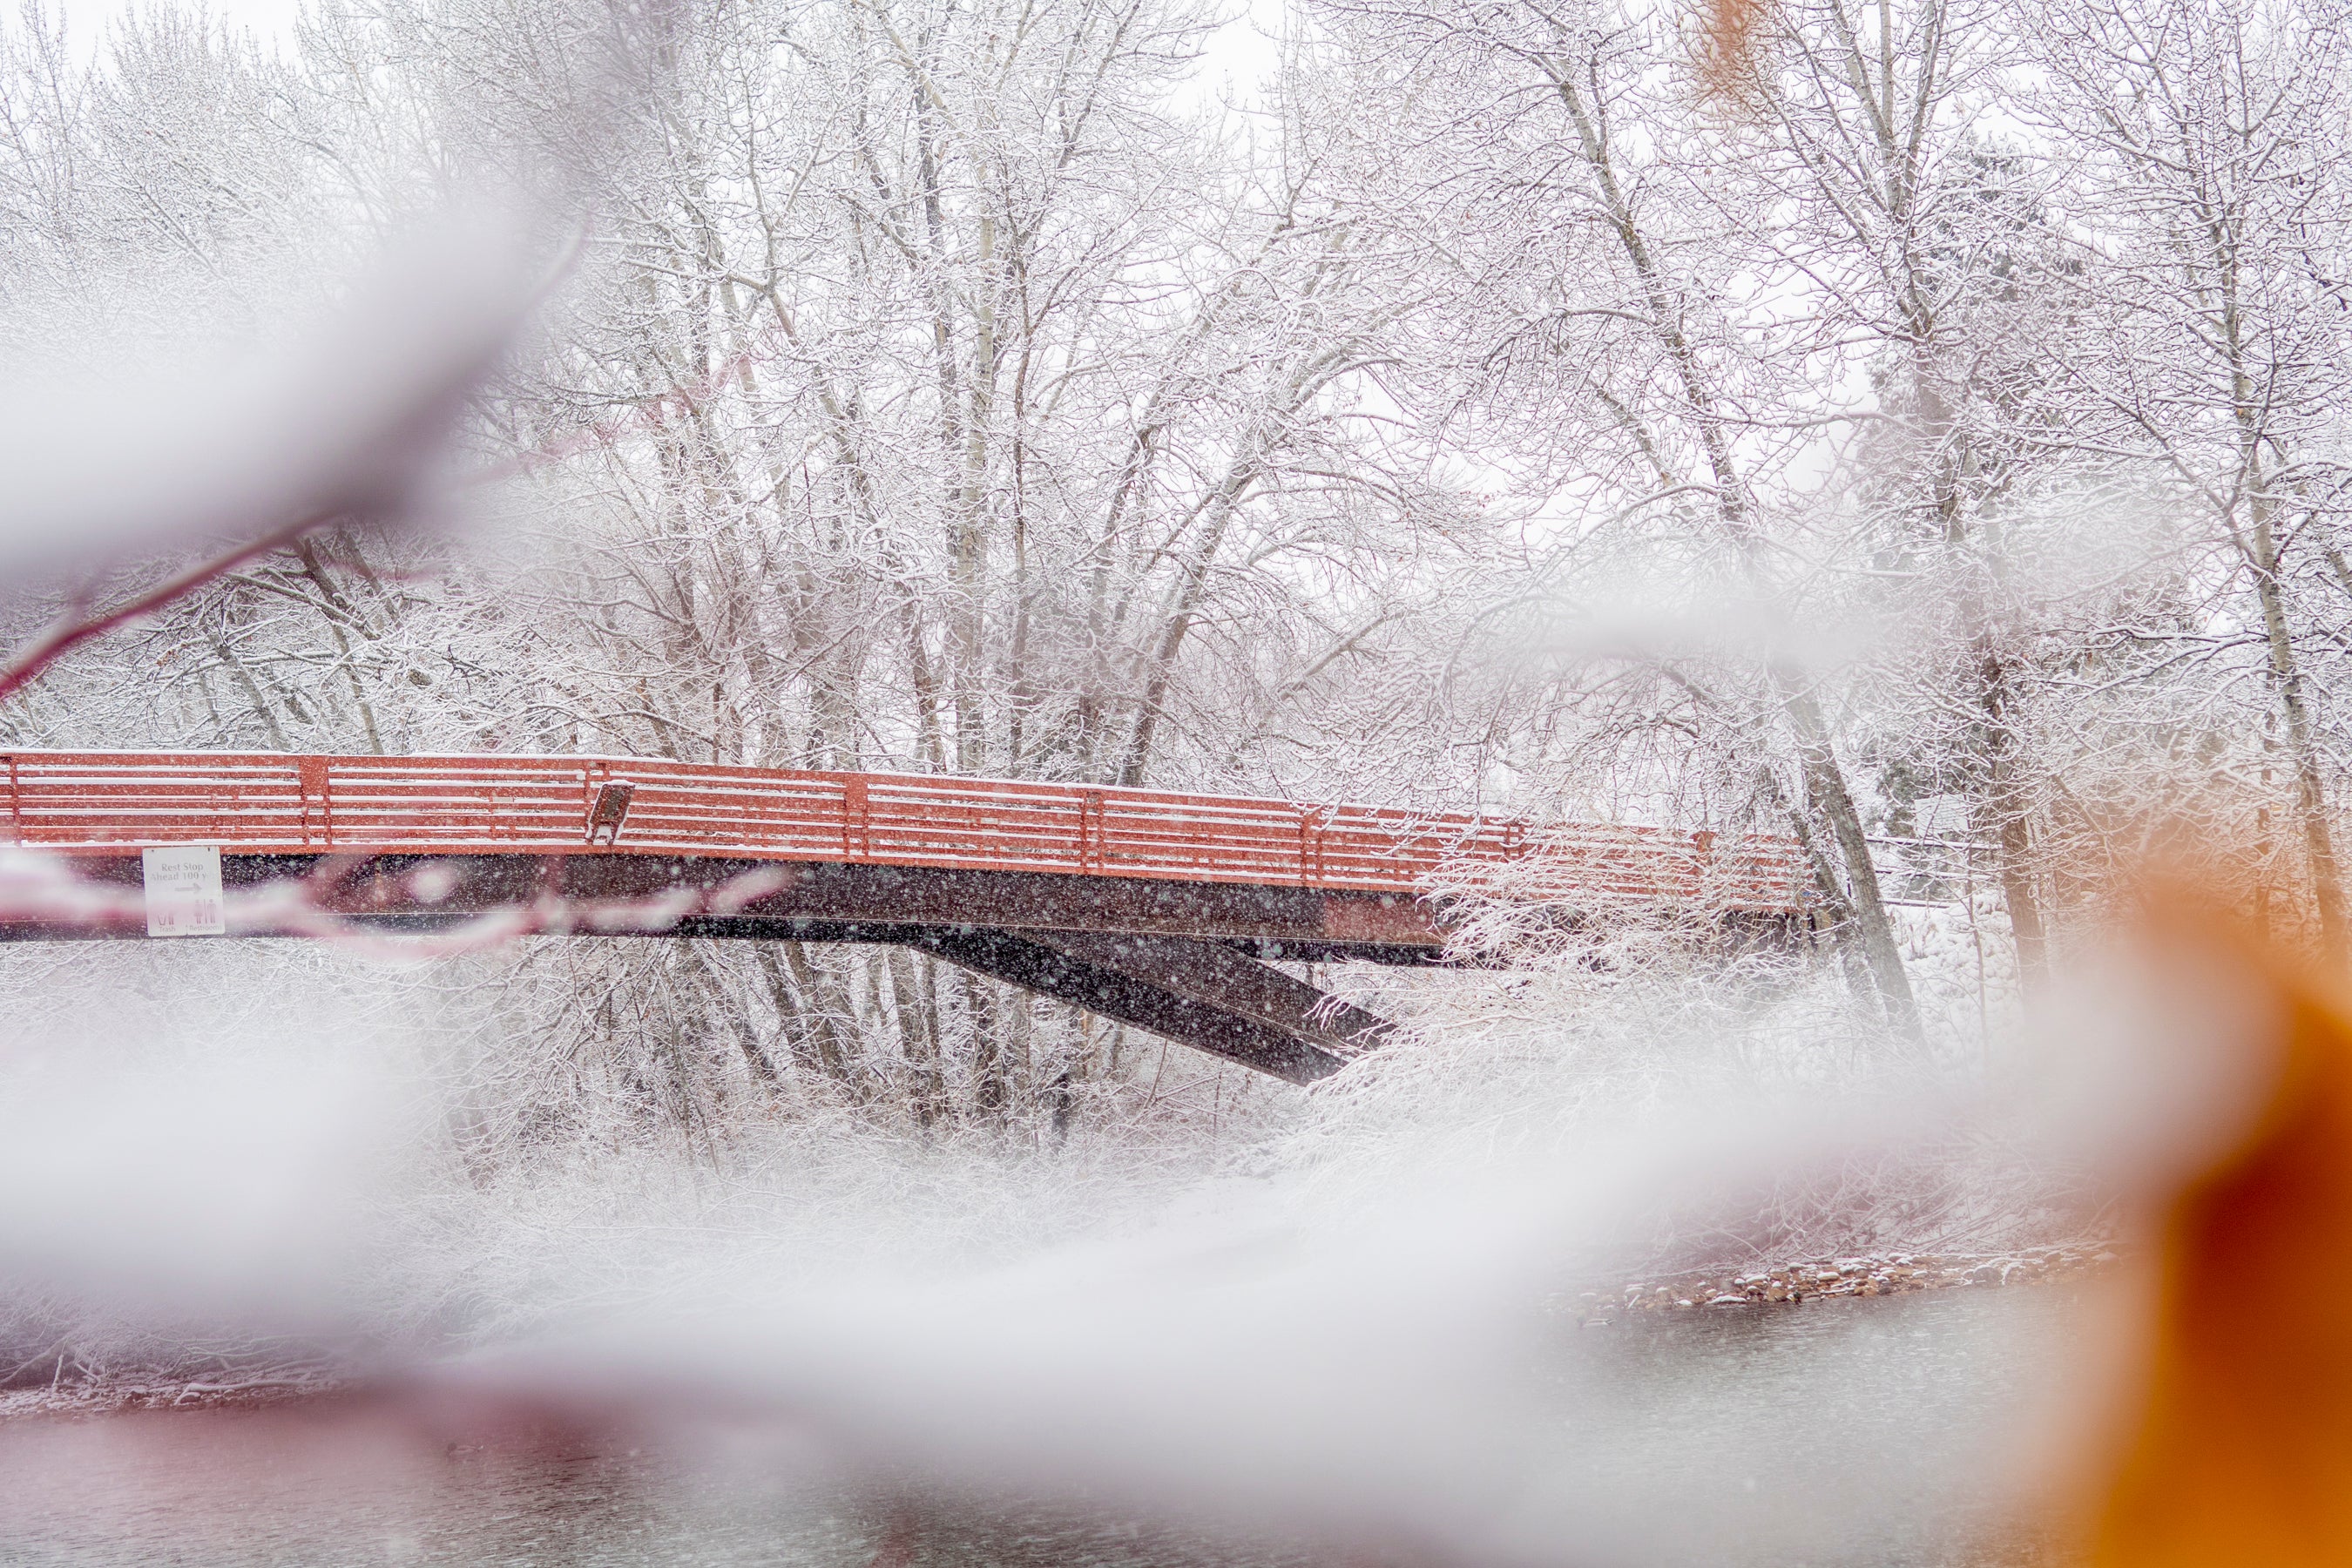 Snow covering Friendship Bridge and the Boise River